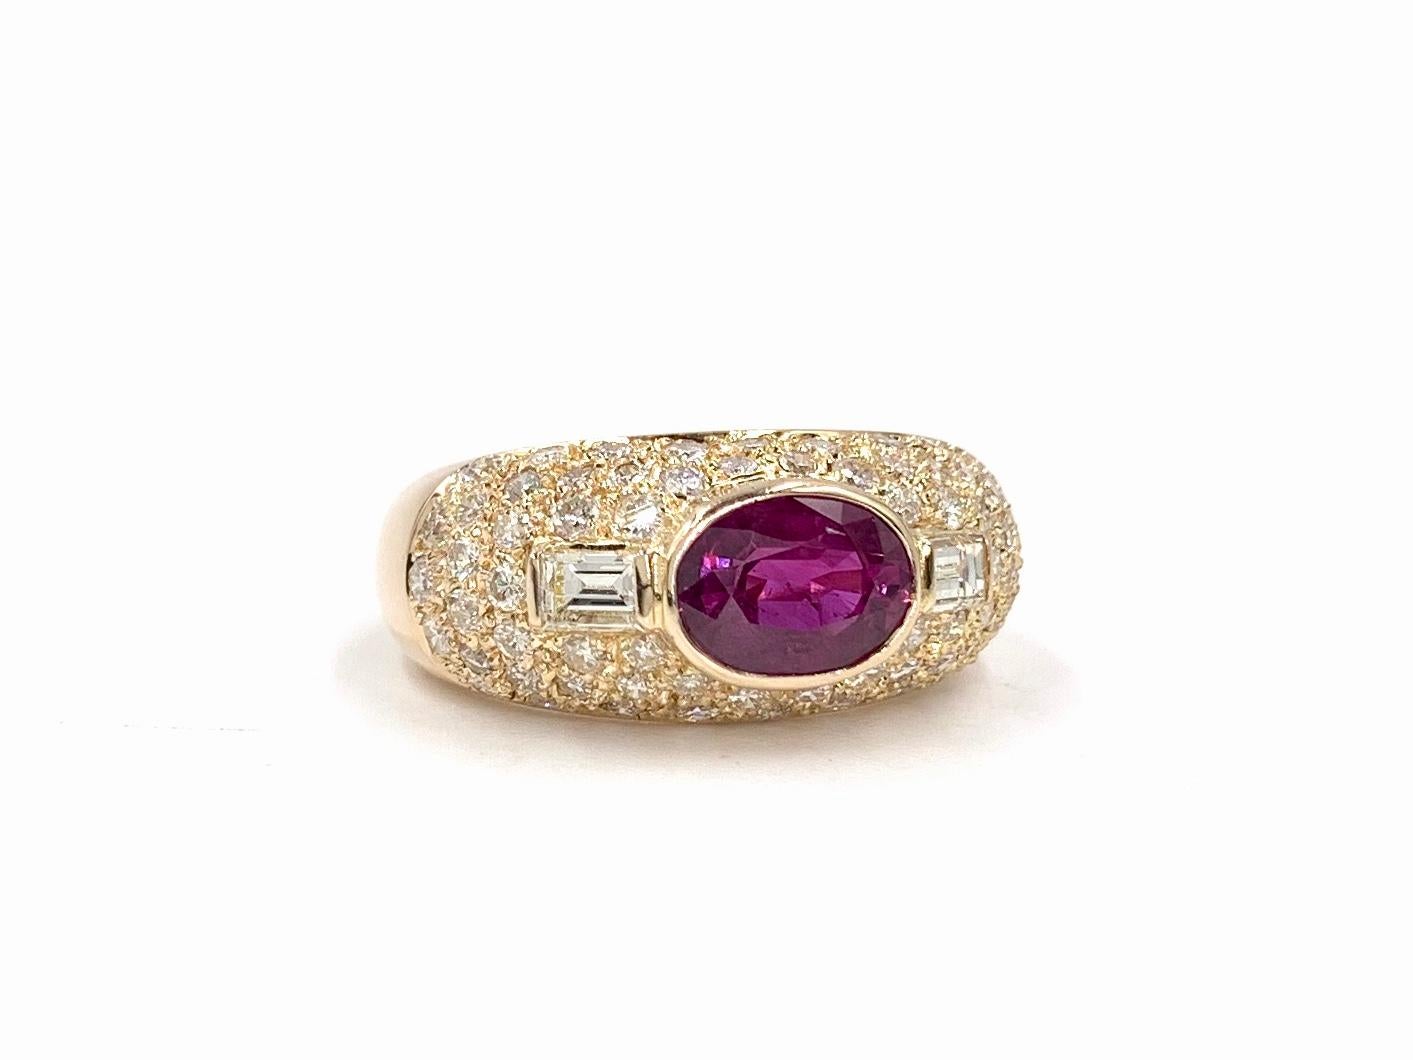 A wearable and beautiful 14 karat rose gold low dome ring featuring a 1.57 carat oval ruby and 1.20 carats of white diamonds. Oval ruby and two baguette diamonds are bezel set for a low profile surrounded by perfectly pave set diamonds. Ruby is of